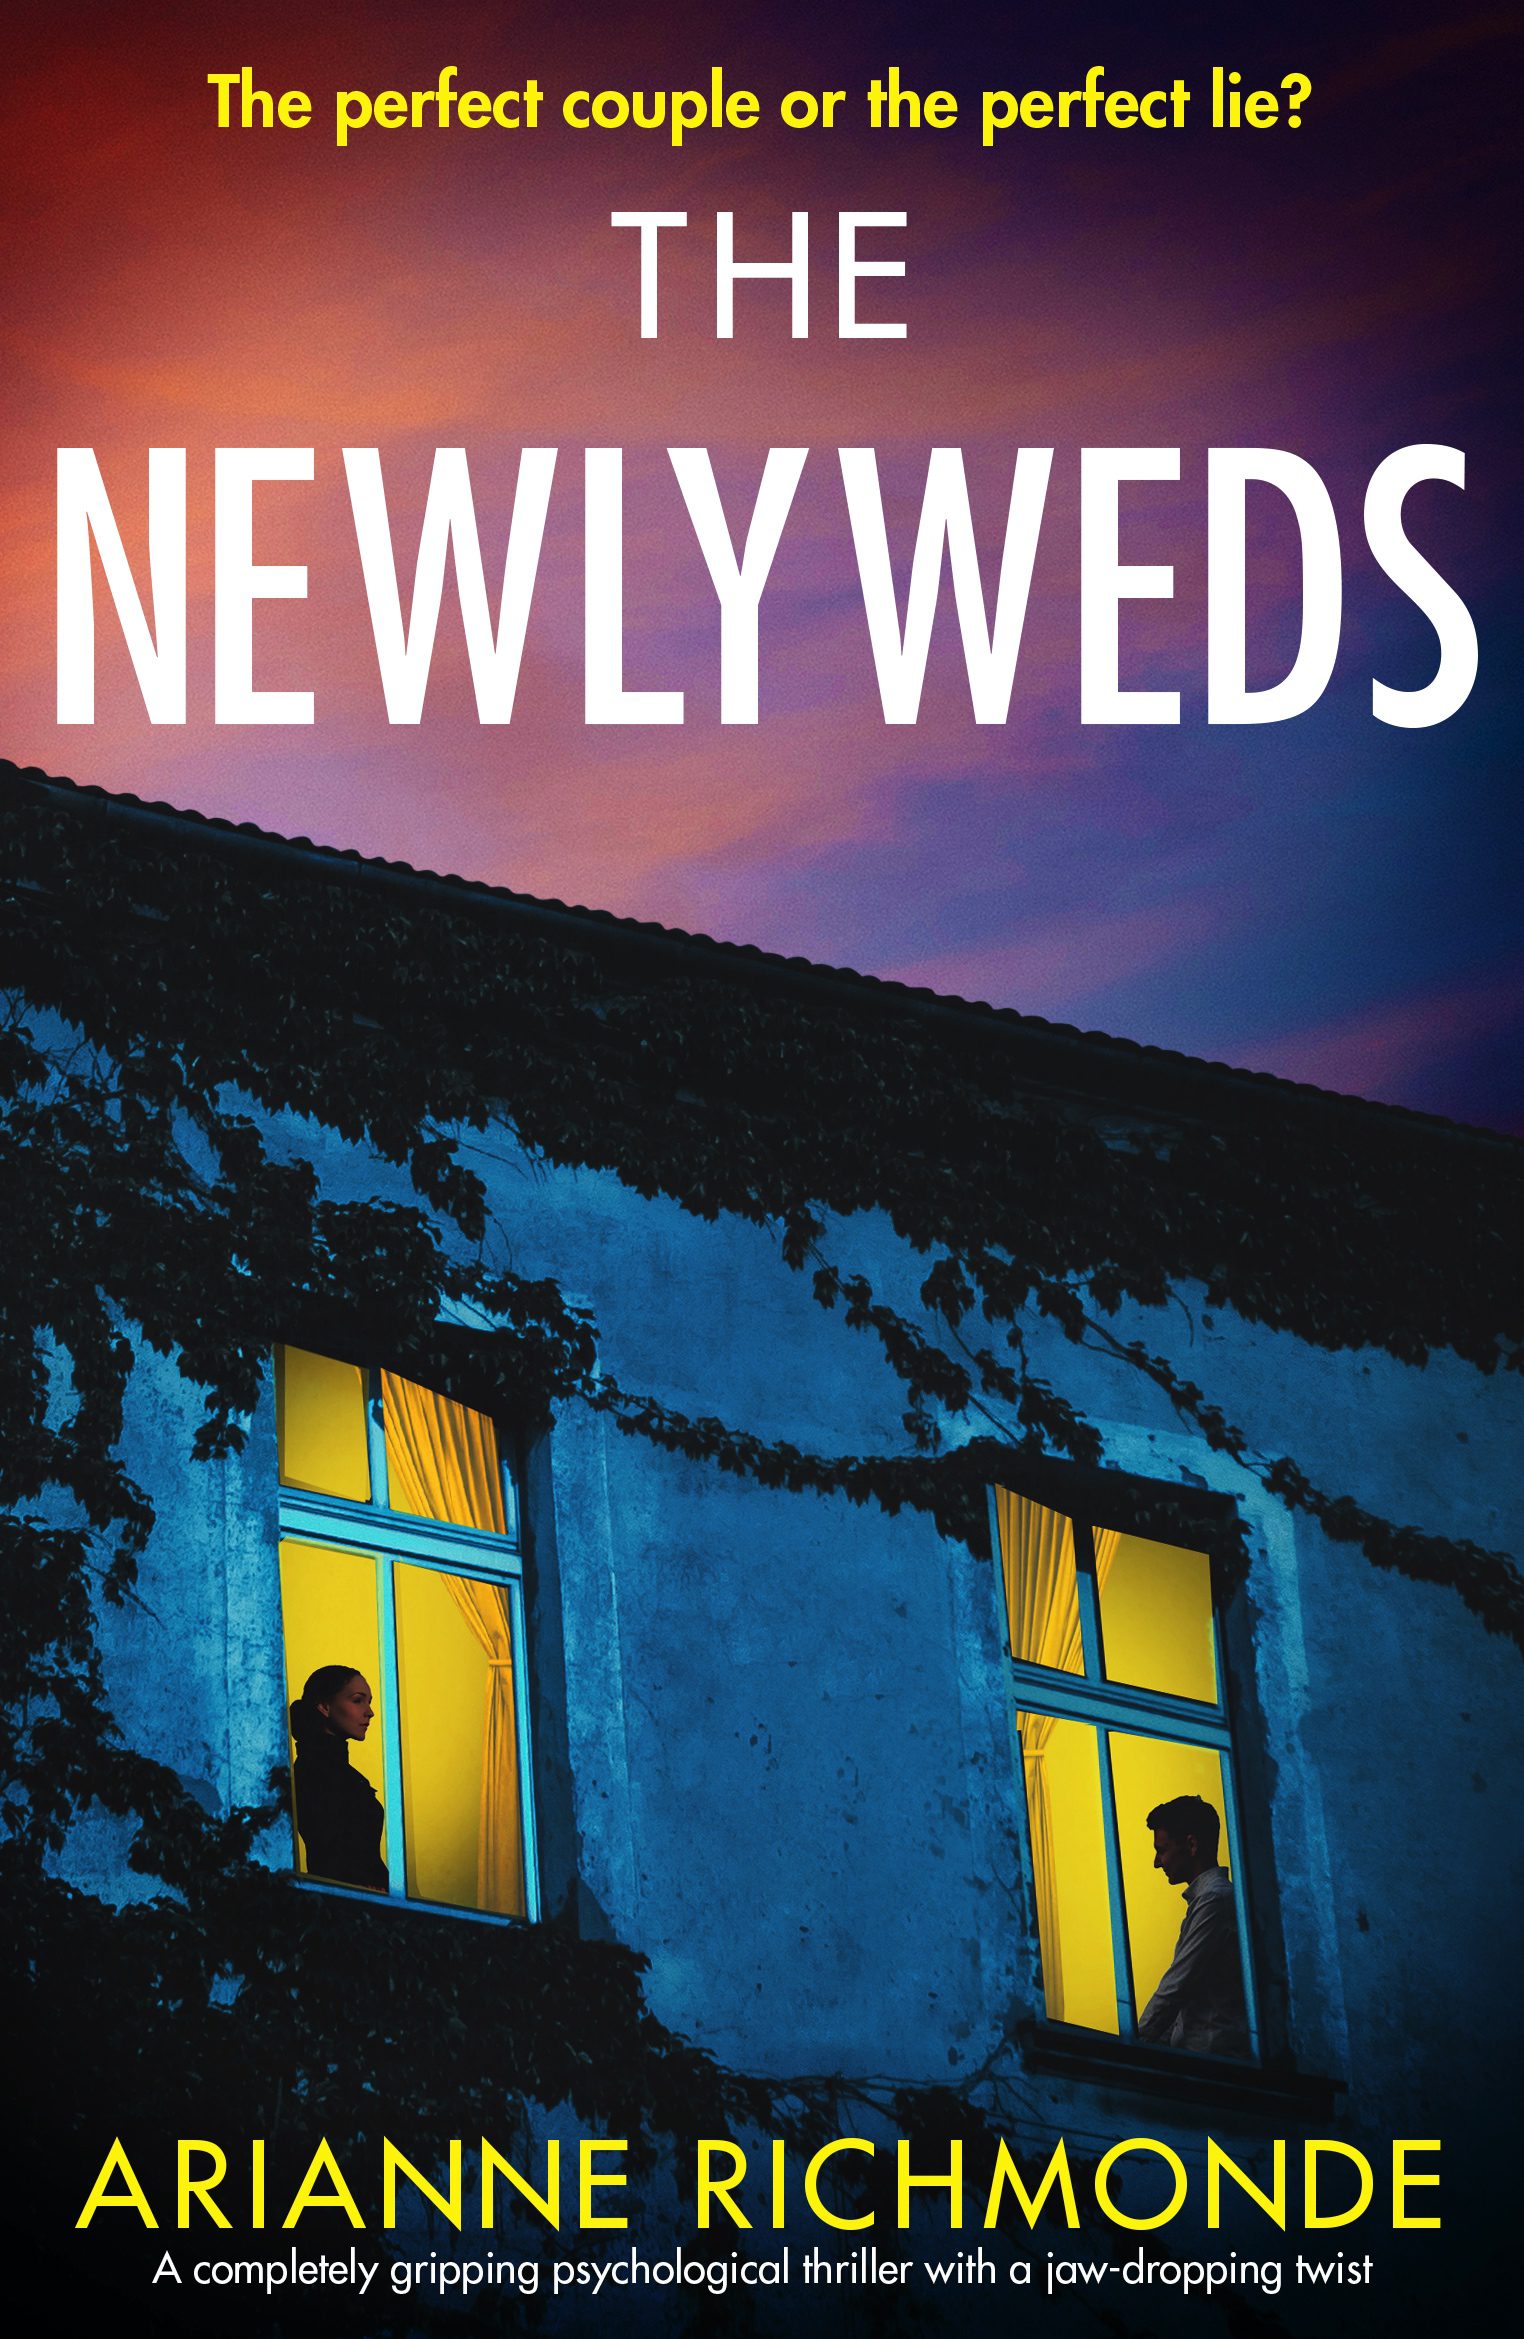 The Newlyweds book cover